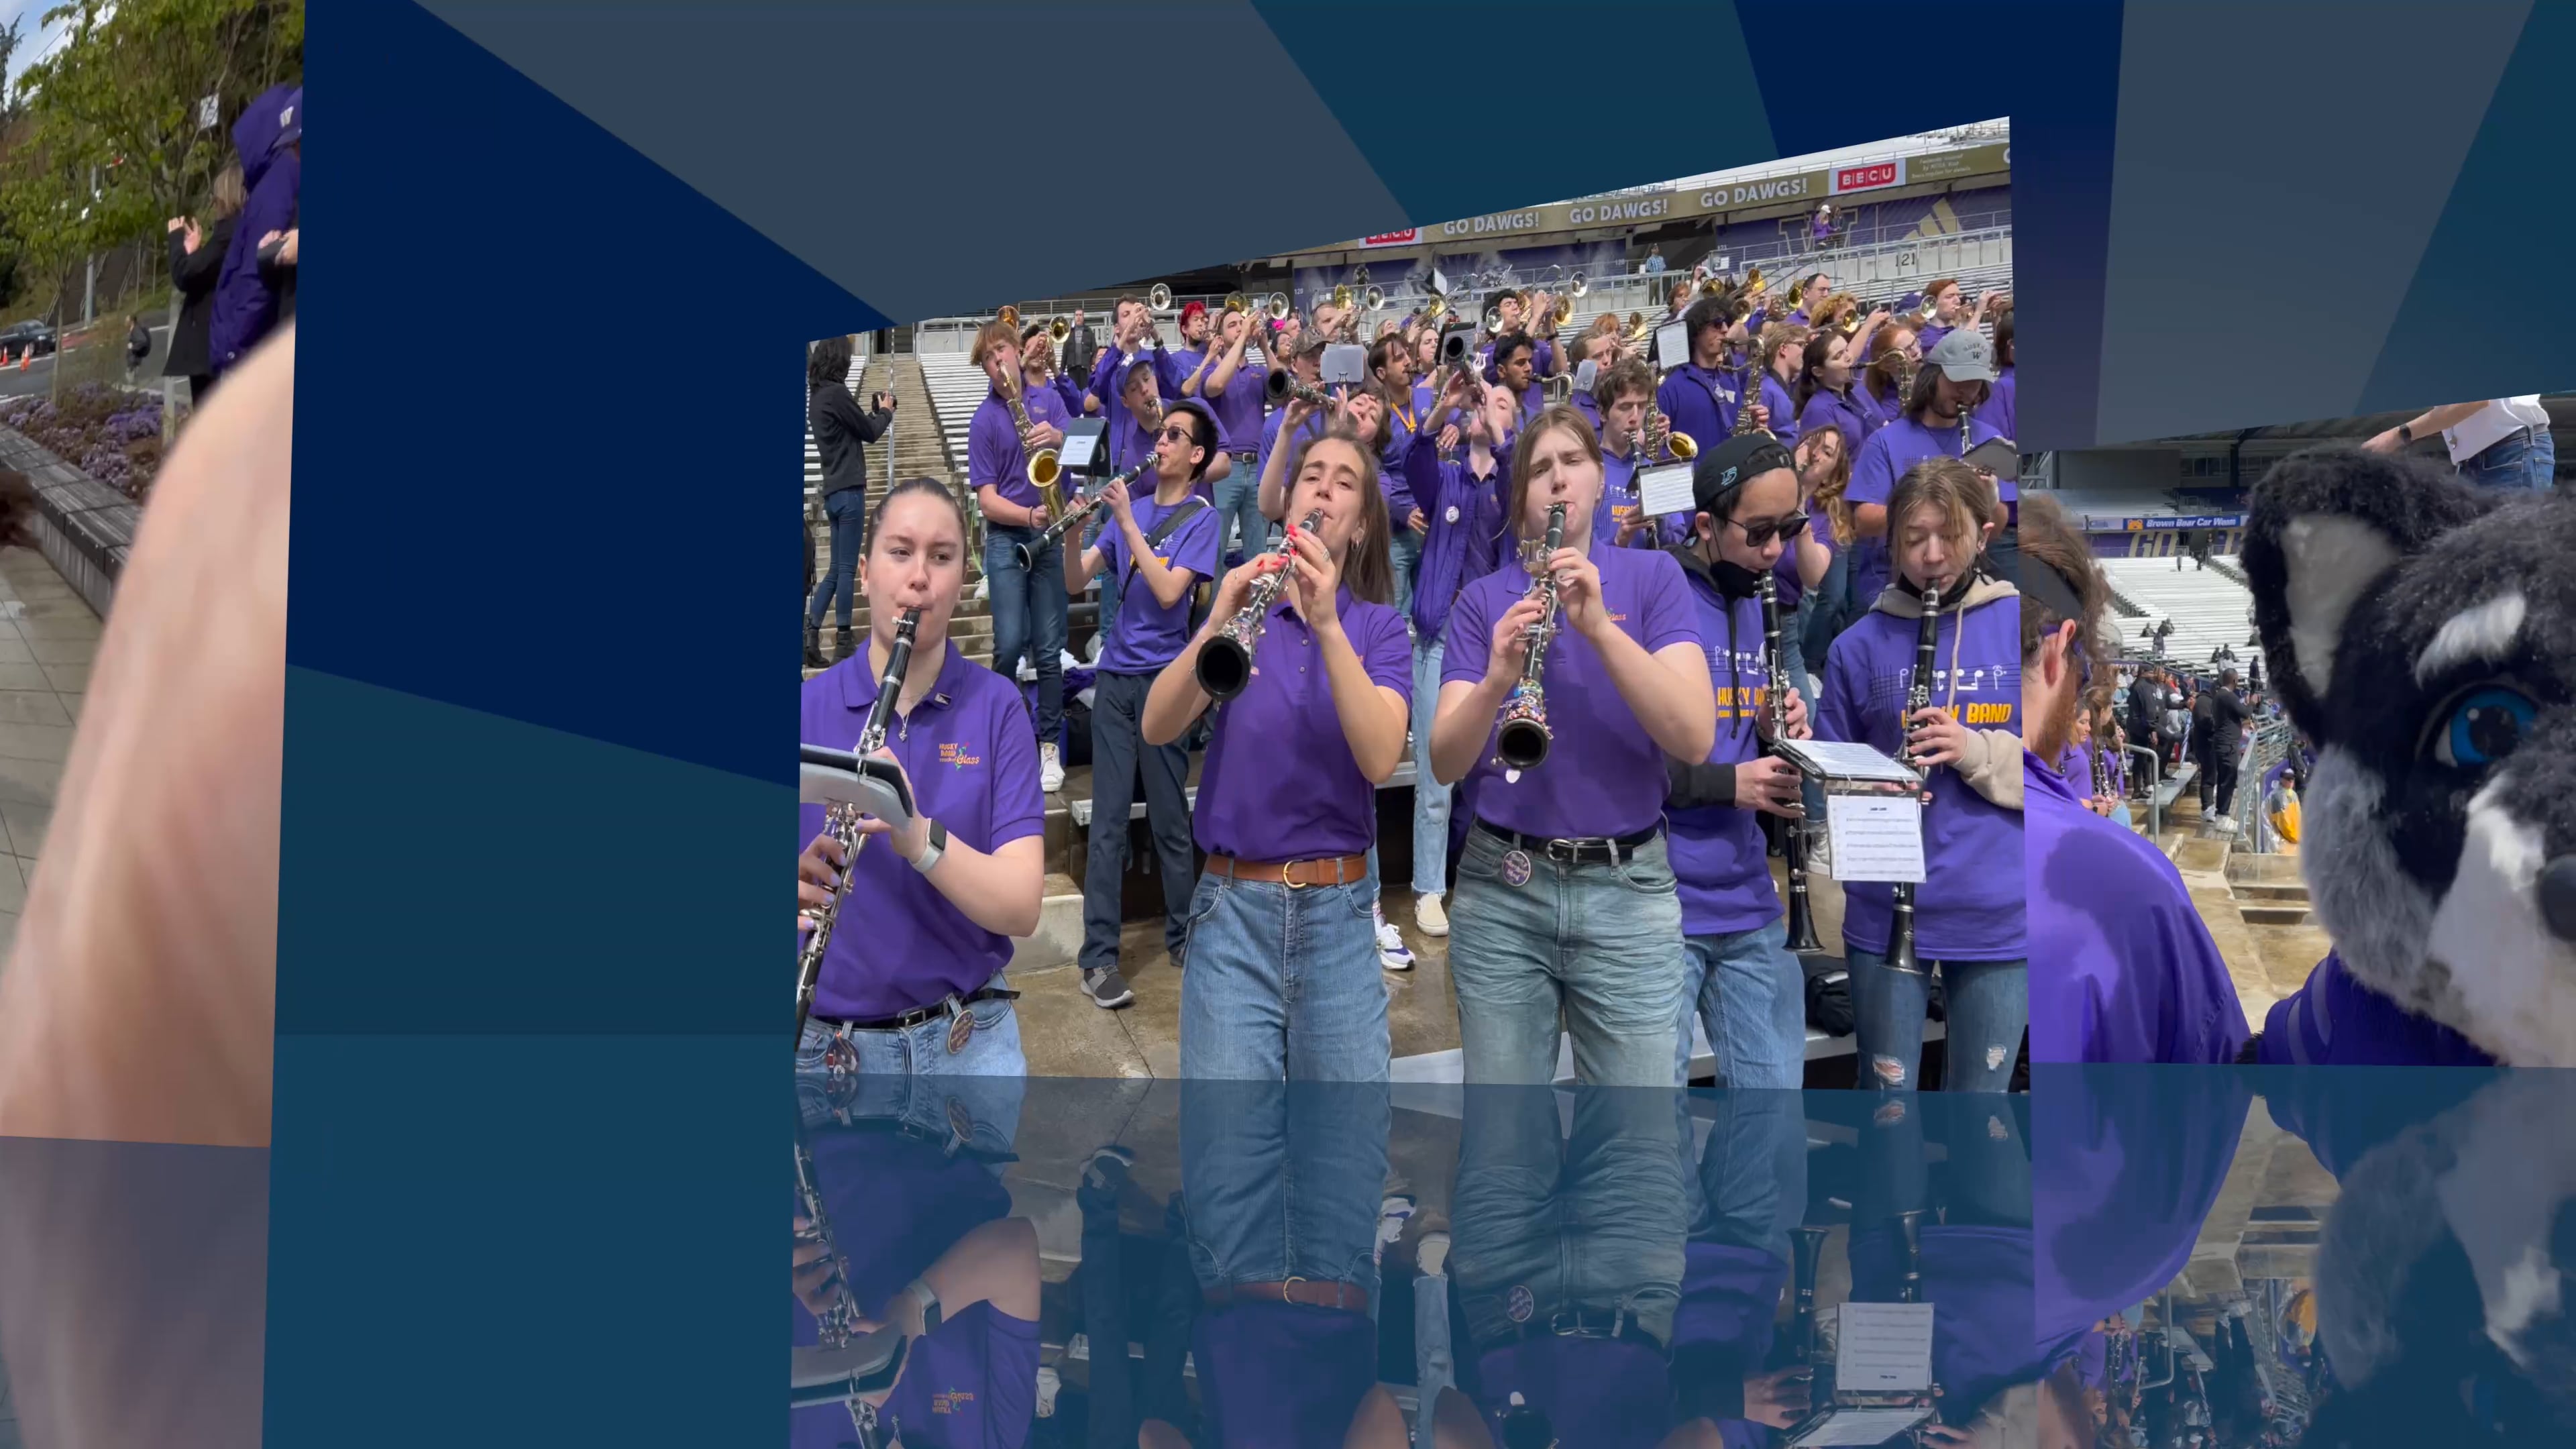 Huskies Spring Game 2022 with the Husky Marching Band on Vimeo